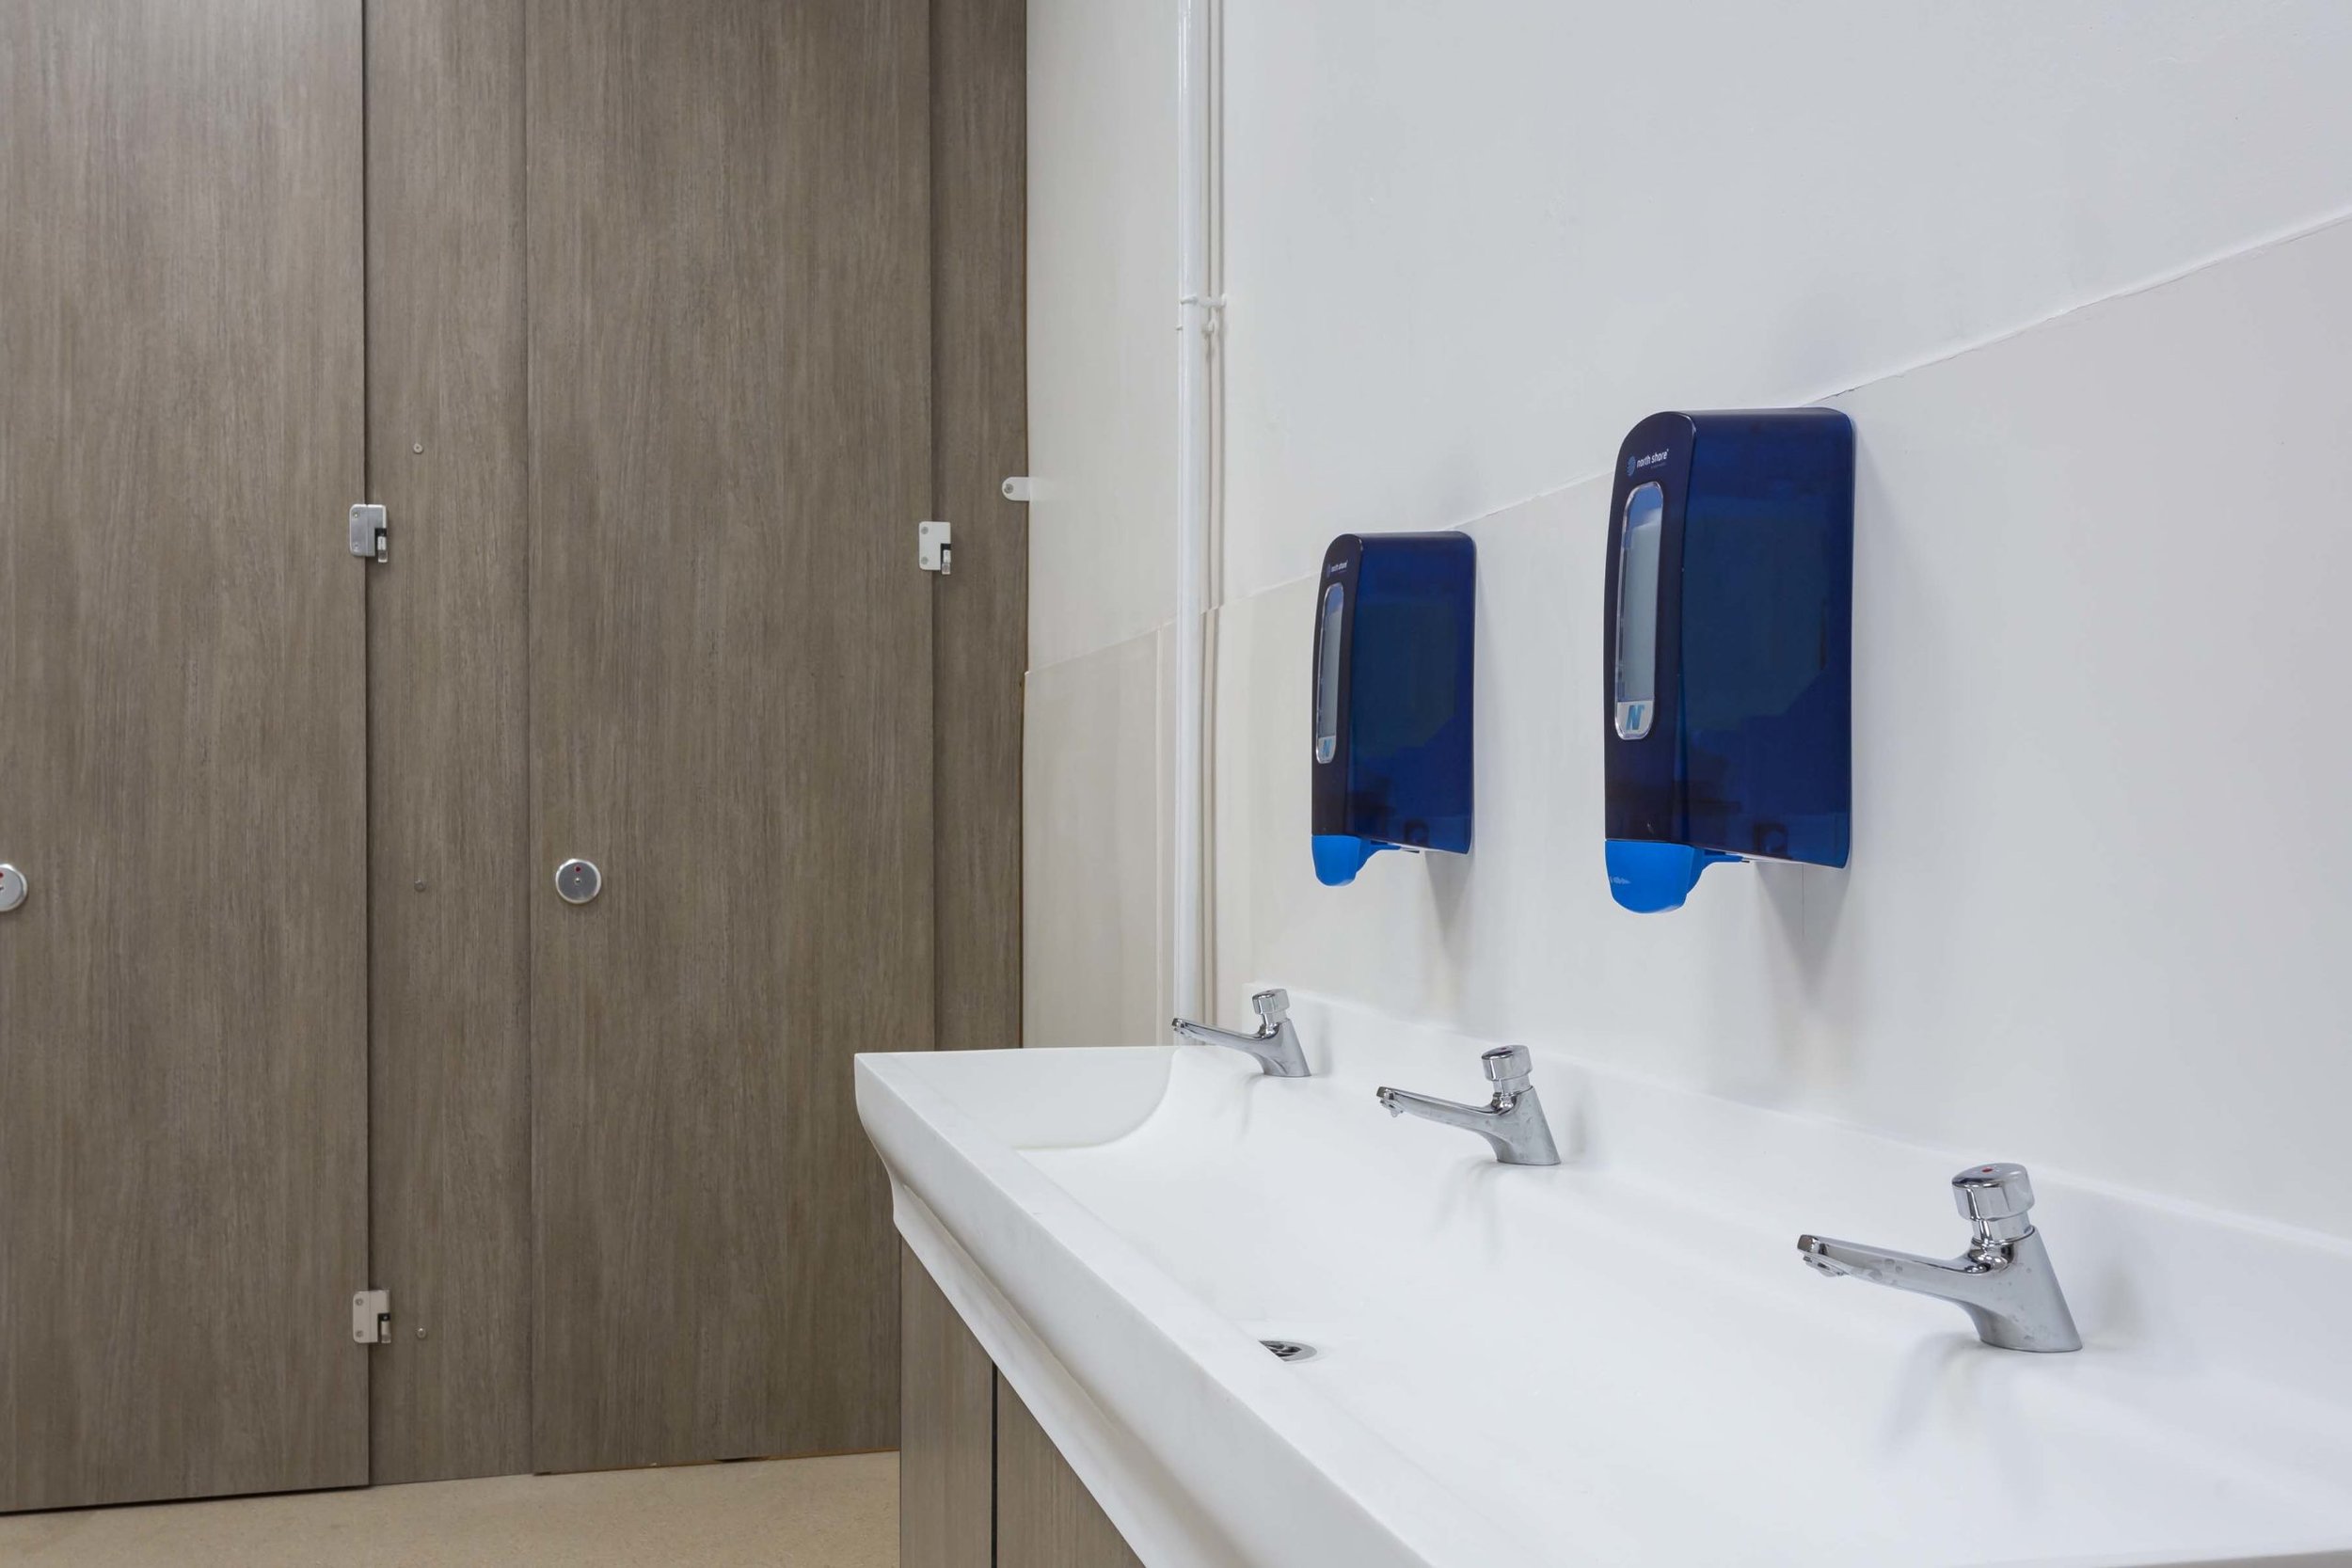 trough with soft touch taps and soap dispensers, woodgrain private cubicles at CNS.jpg